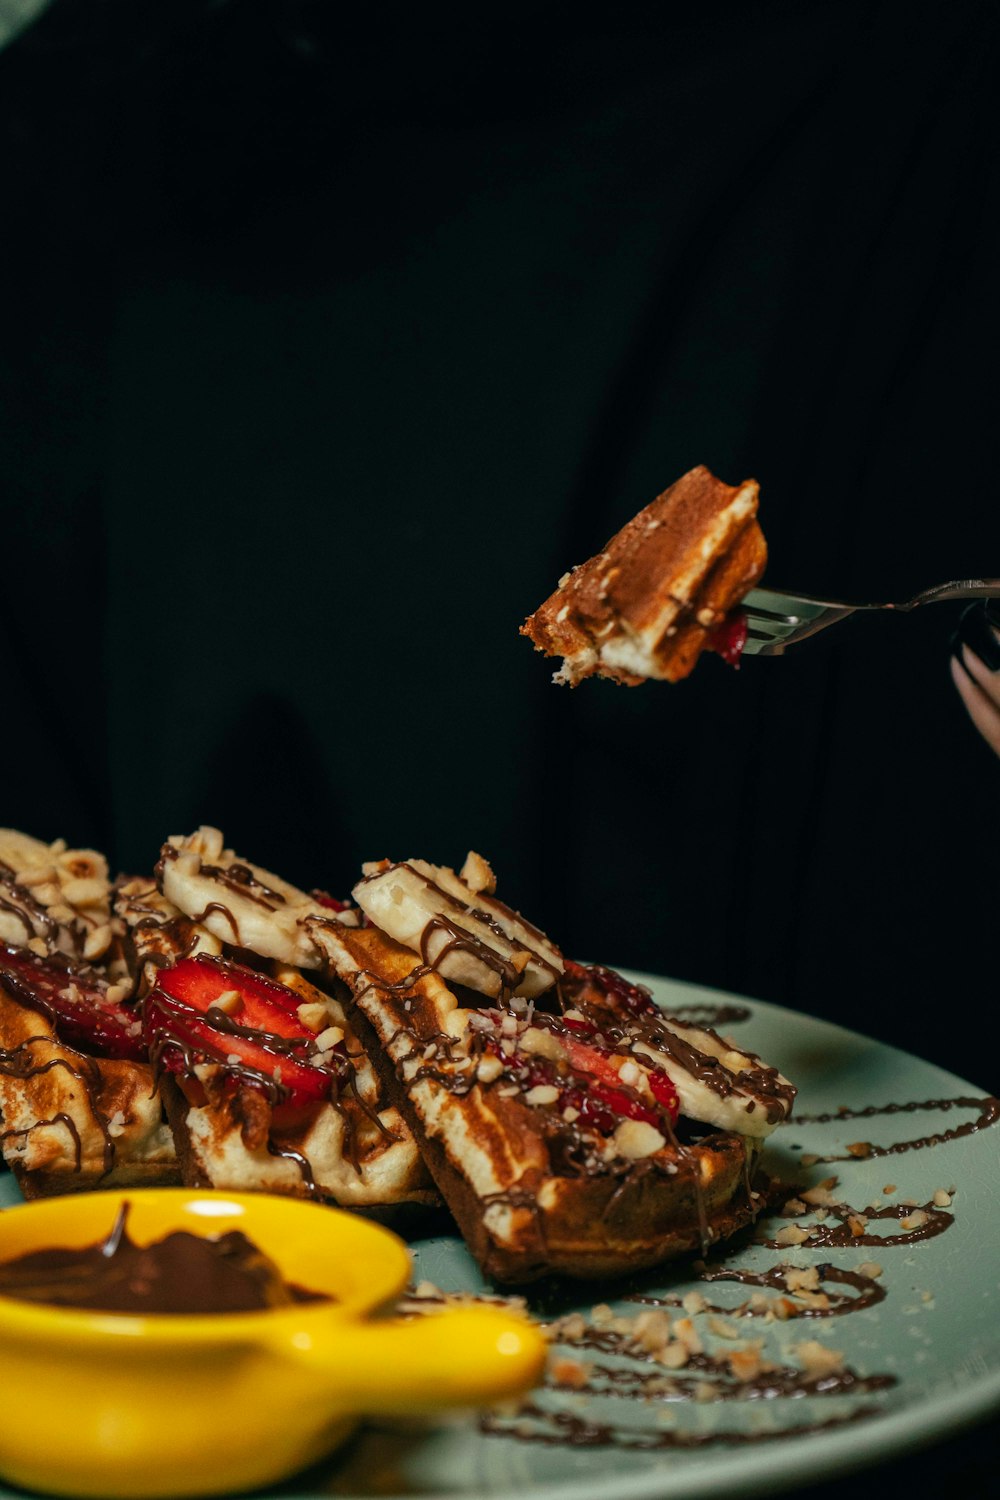 a person eating waffles with chocolate sauce and strawberries